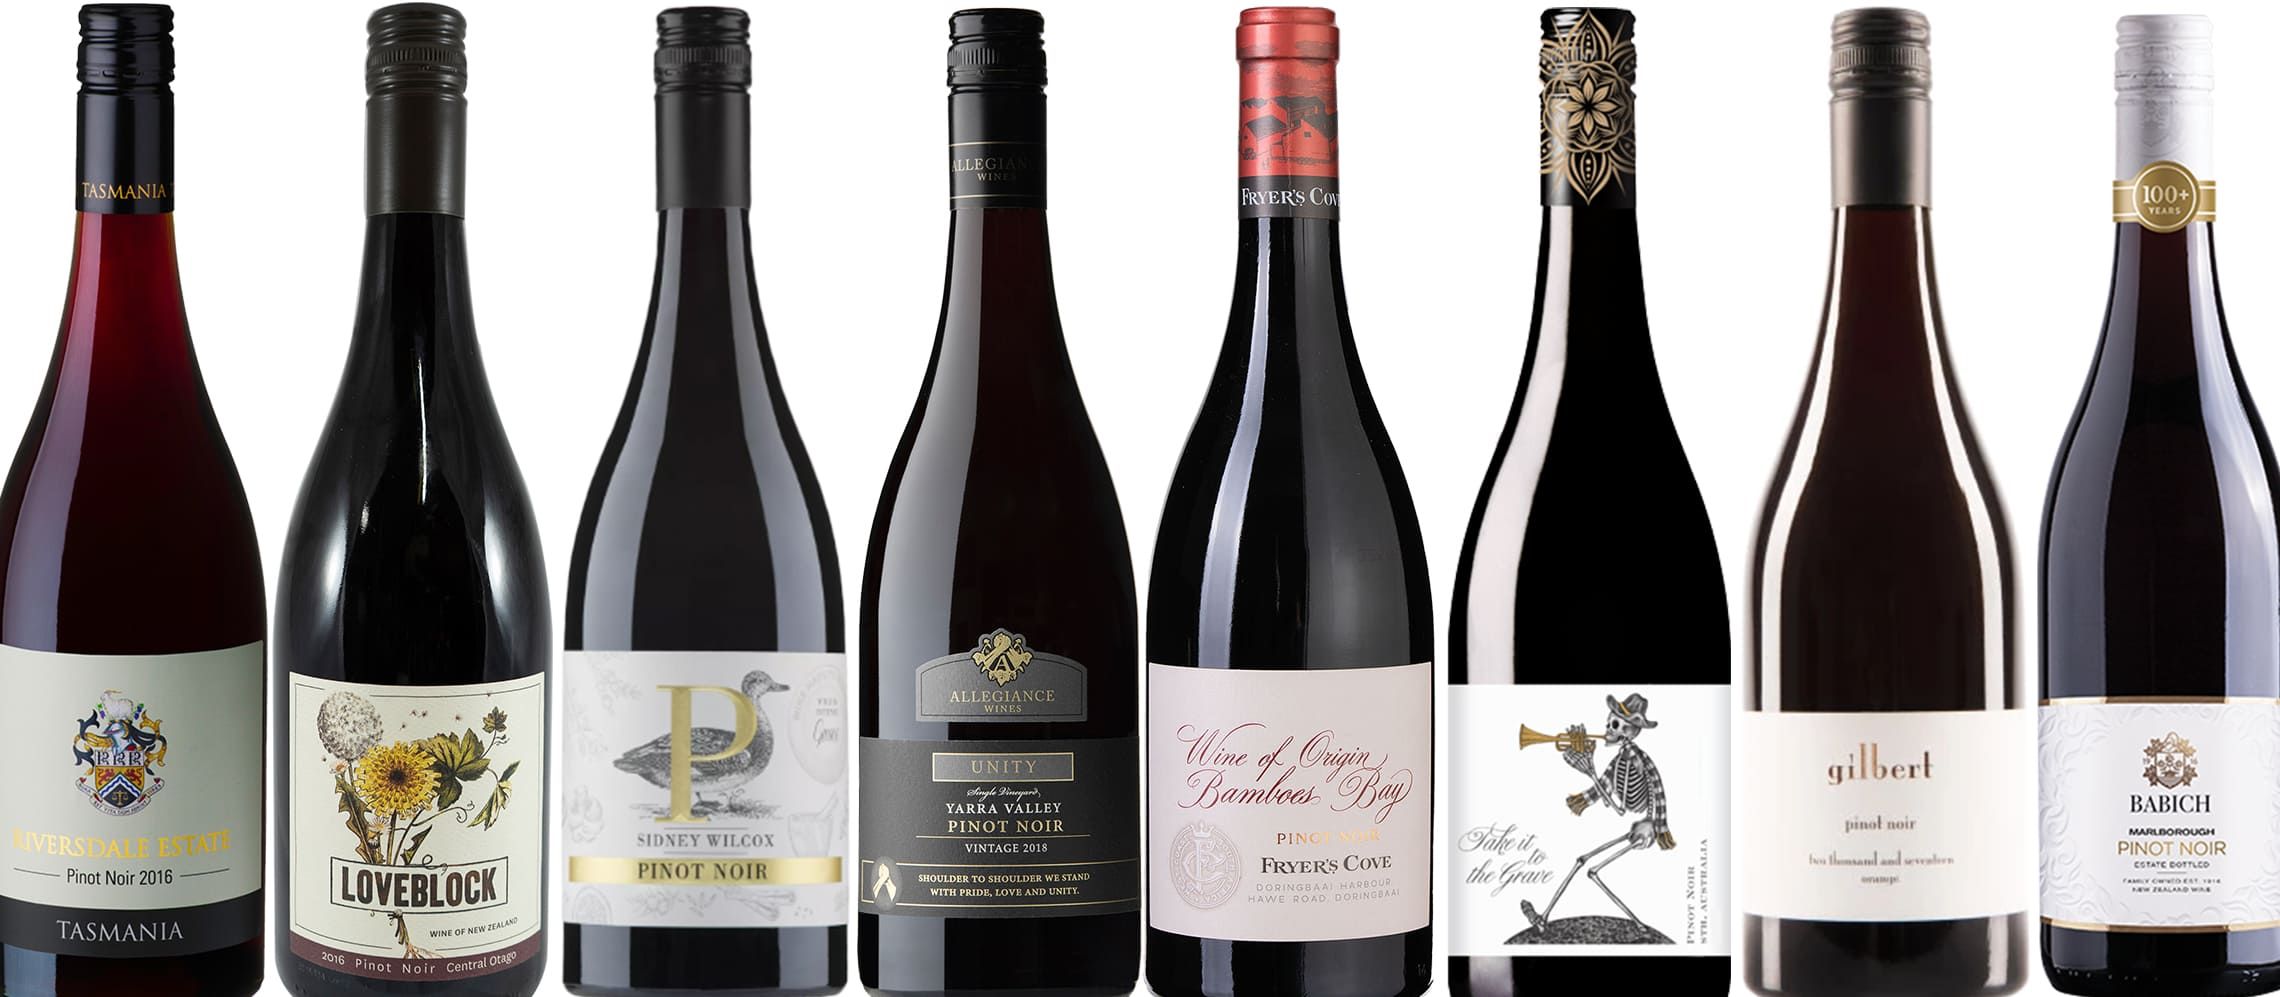 Photo for: Guide to the 9 Best Pinot Noir Wines